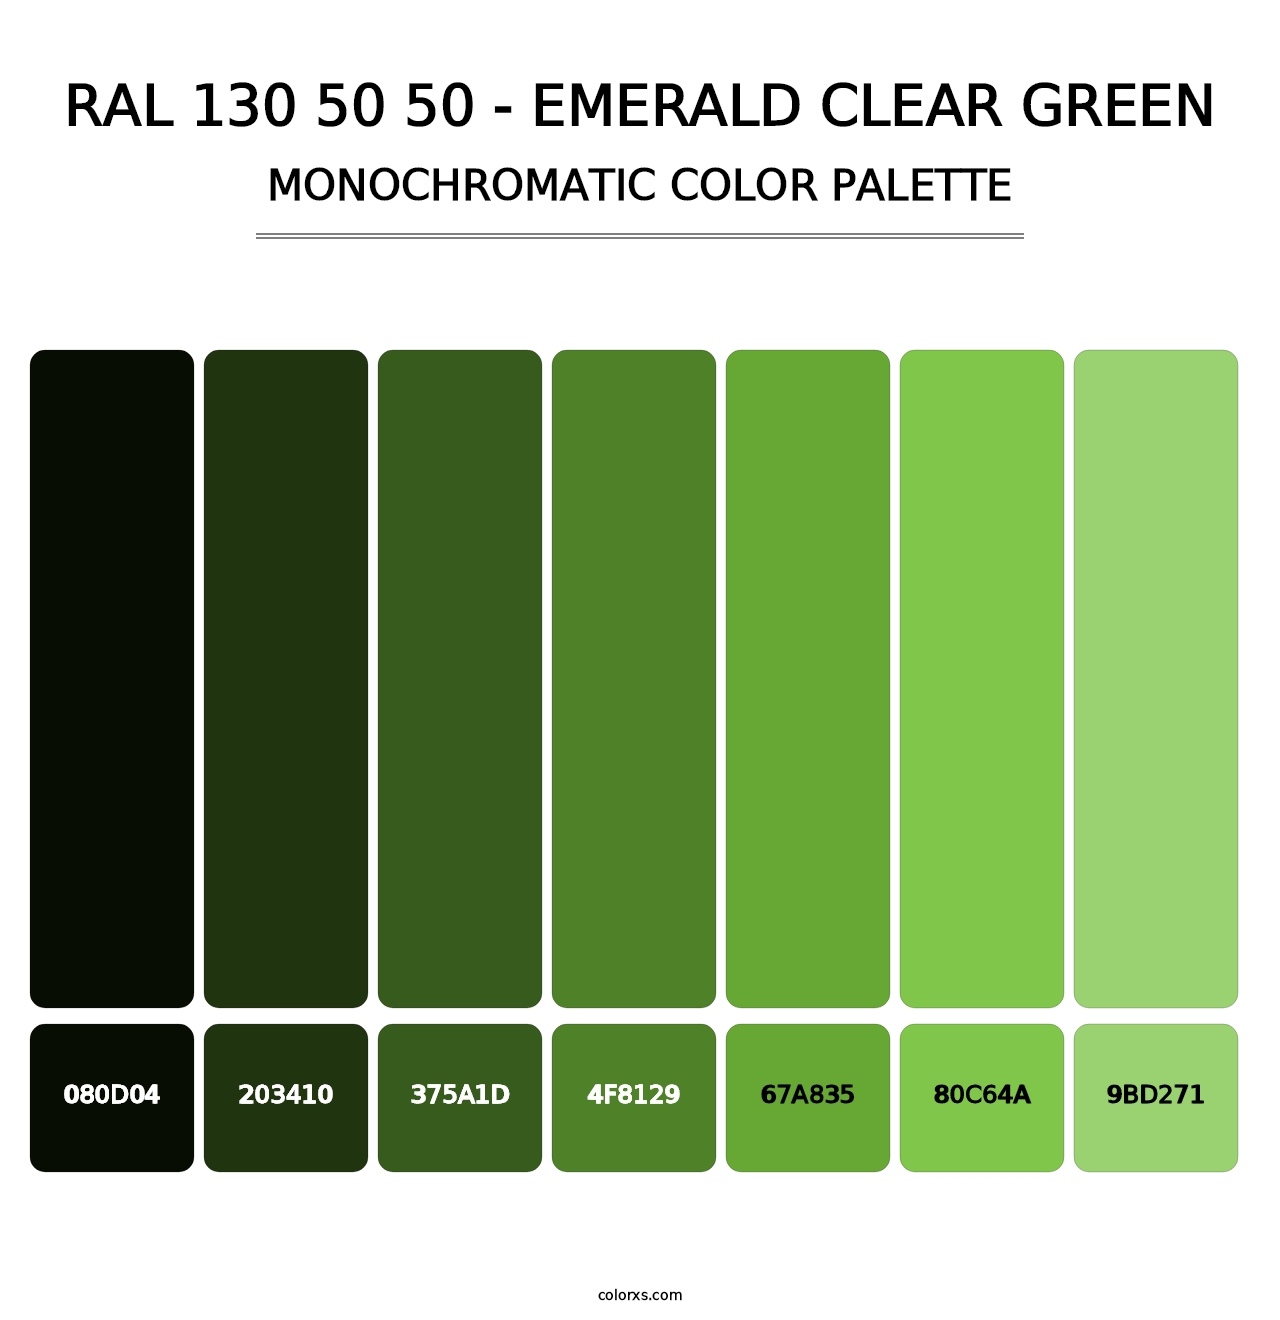 RAL 130 50 50 - Emerald Clear Green - Monochromatic Color Palette